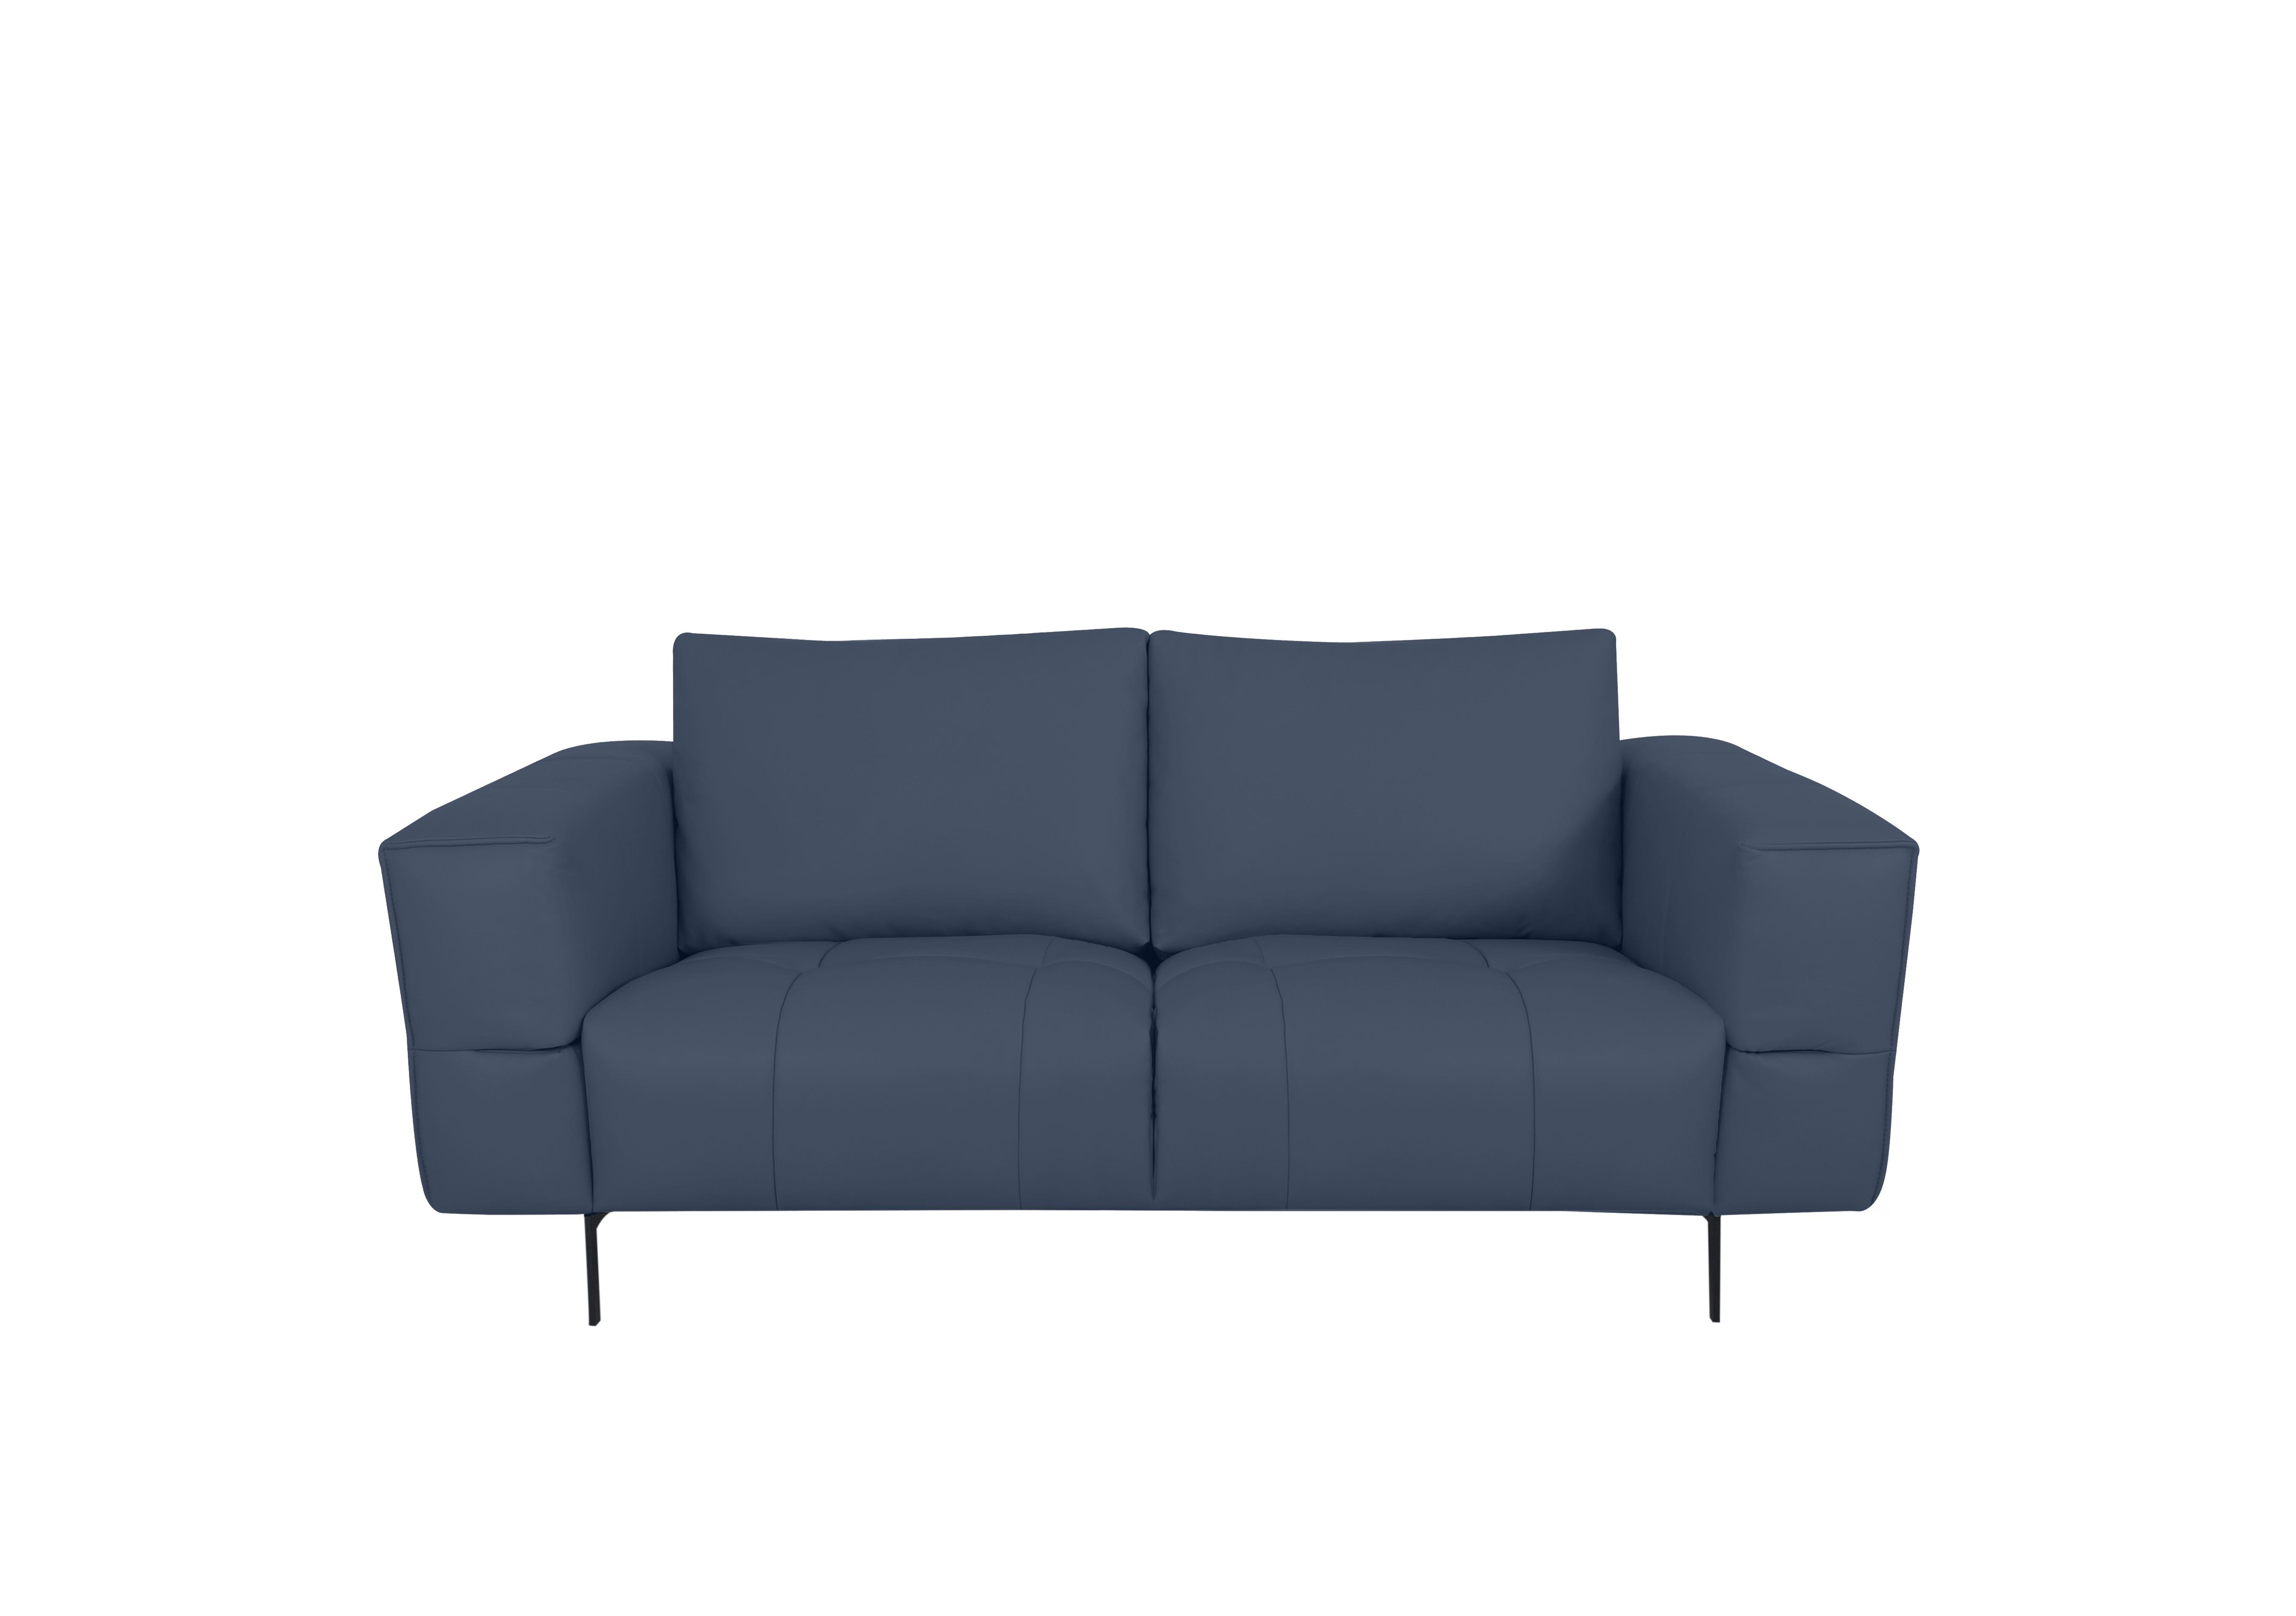 Lawson 2 Seater Leather Sofa in Nn-518e Ocean Blue on Furniture Village